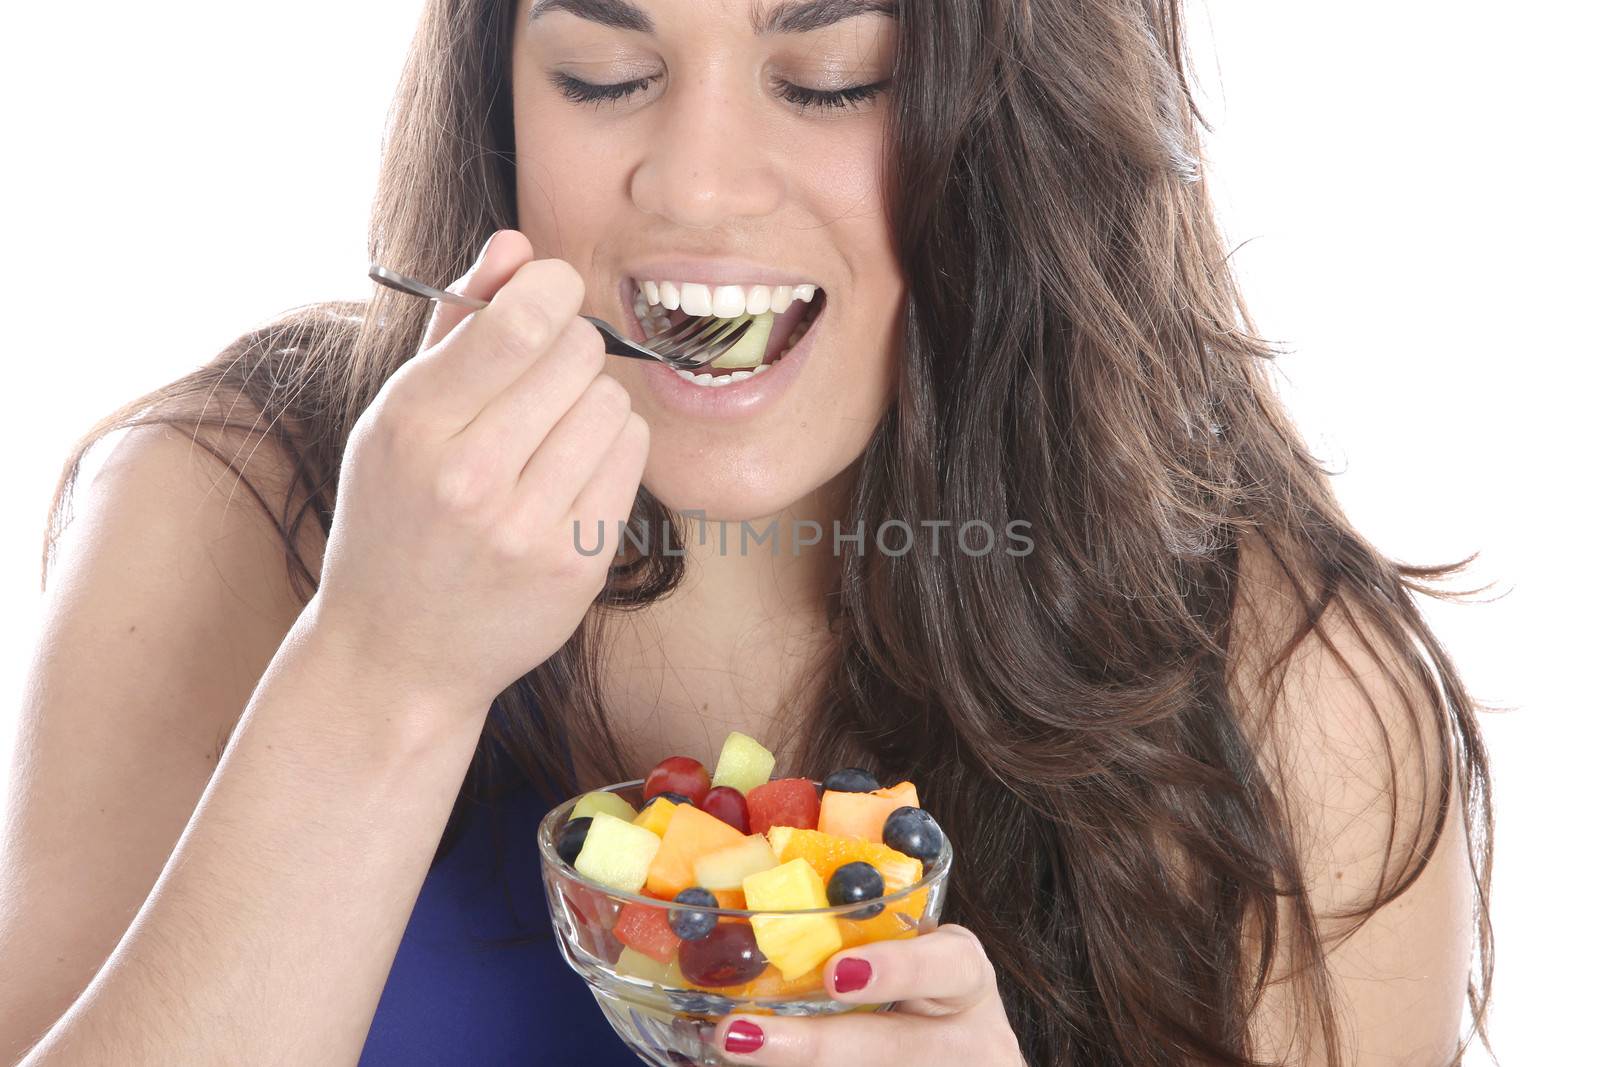 Model Released. Young Woman Eating Fresh Fruit Salad